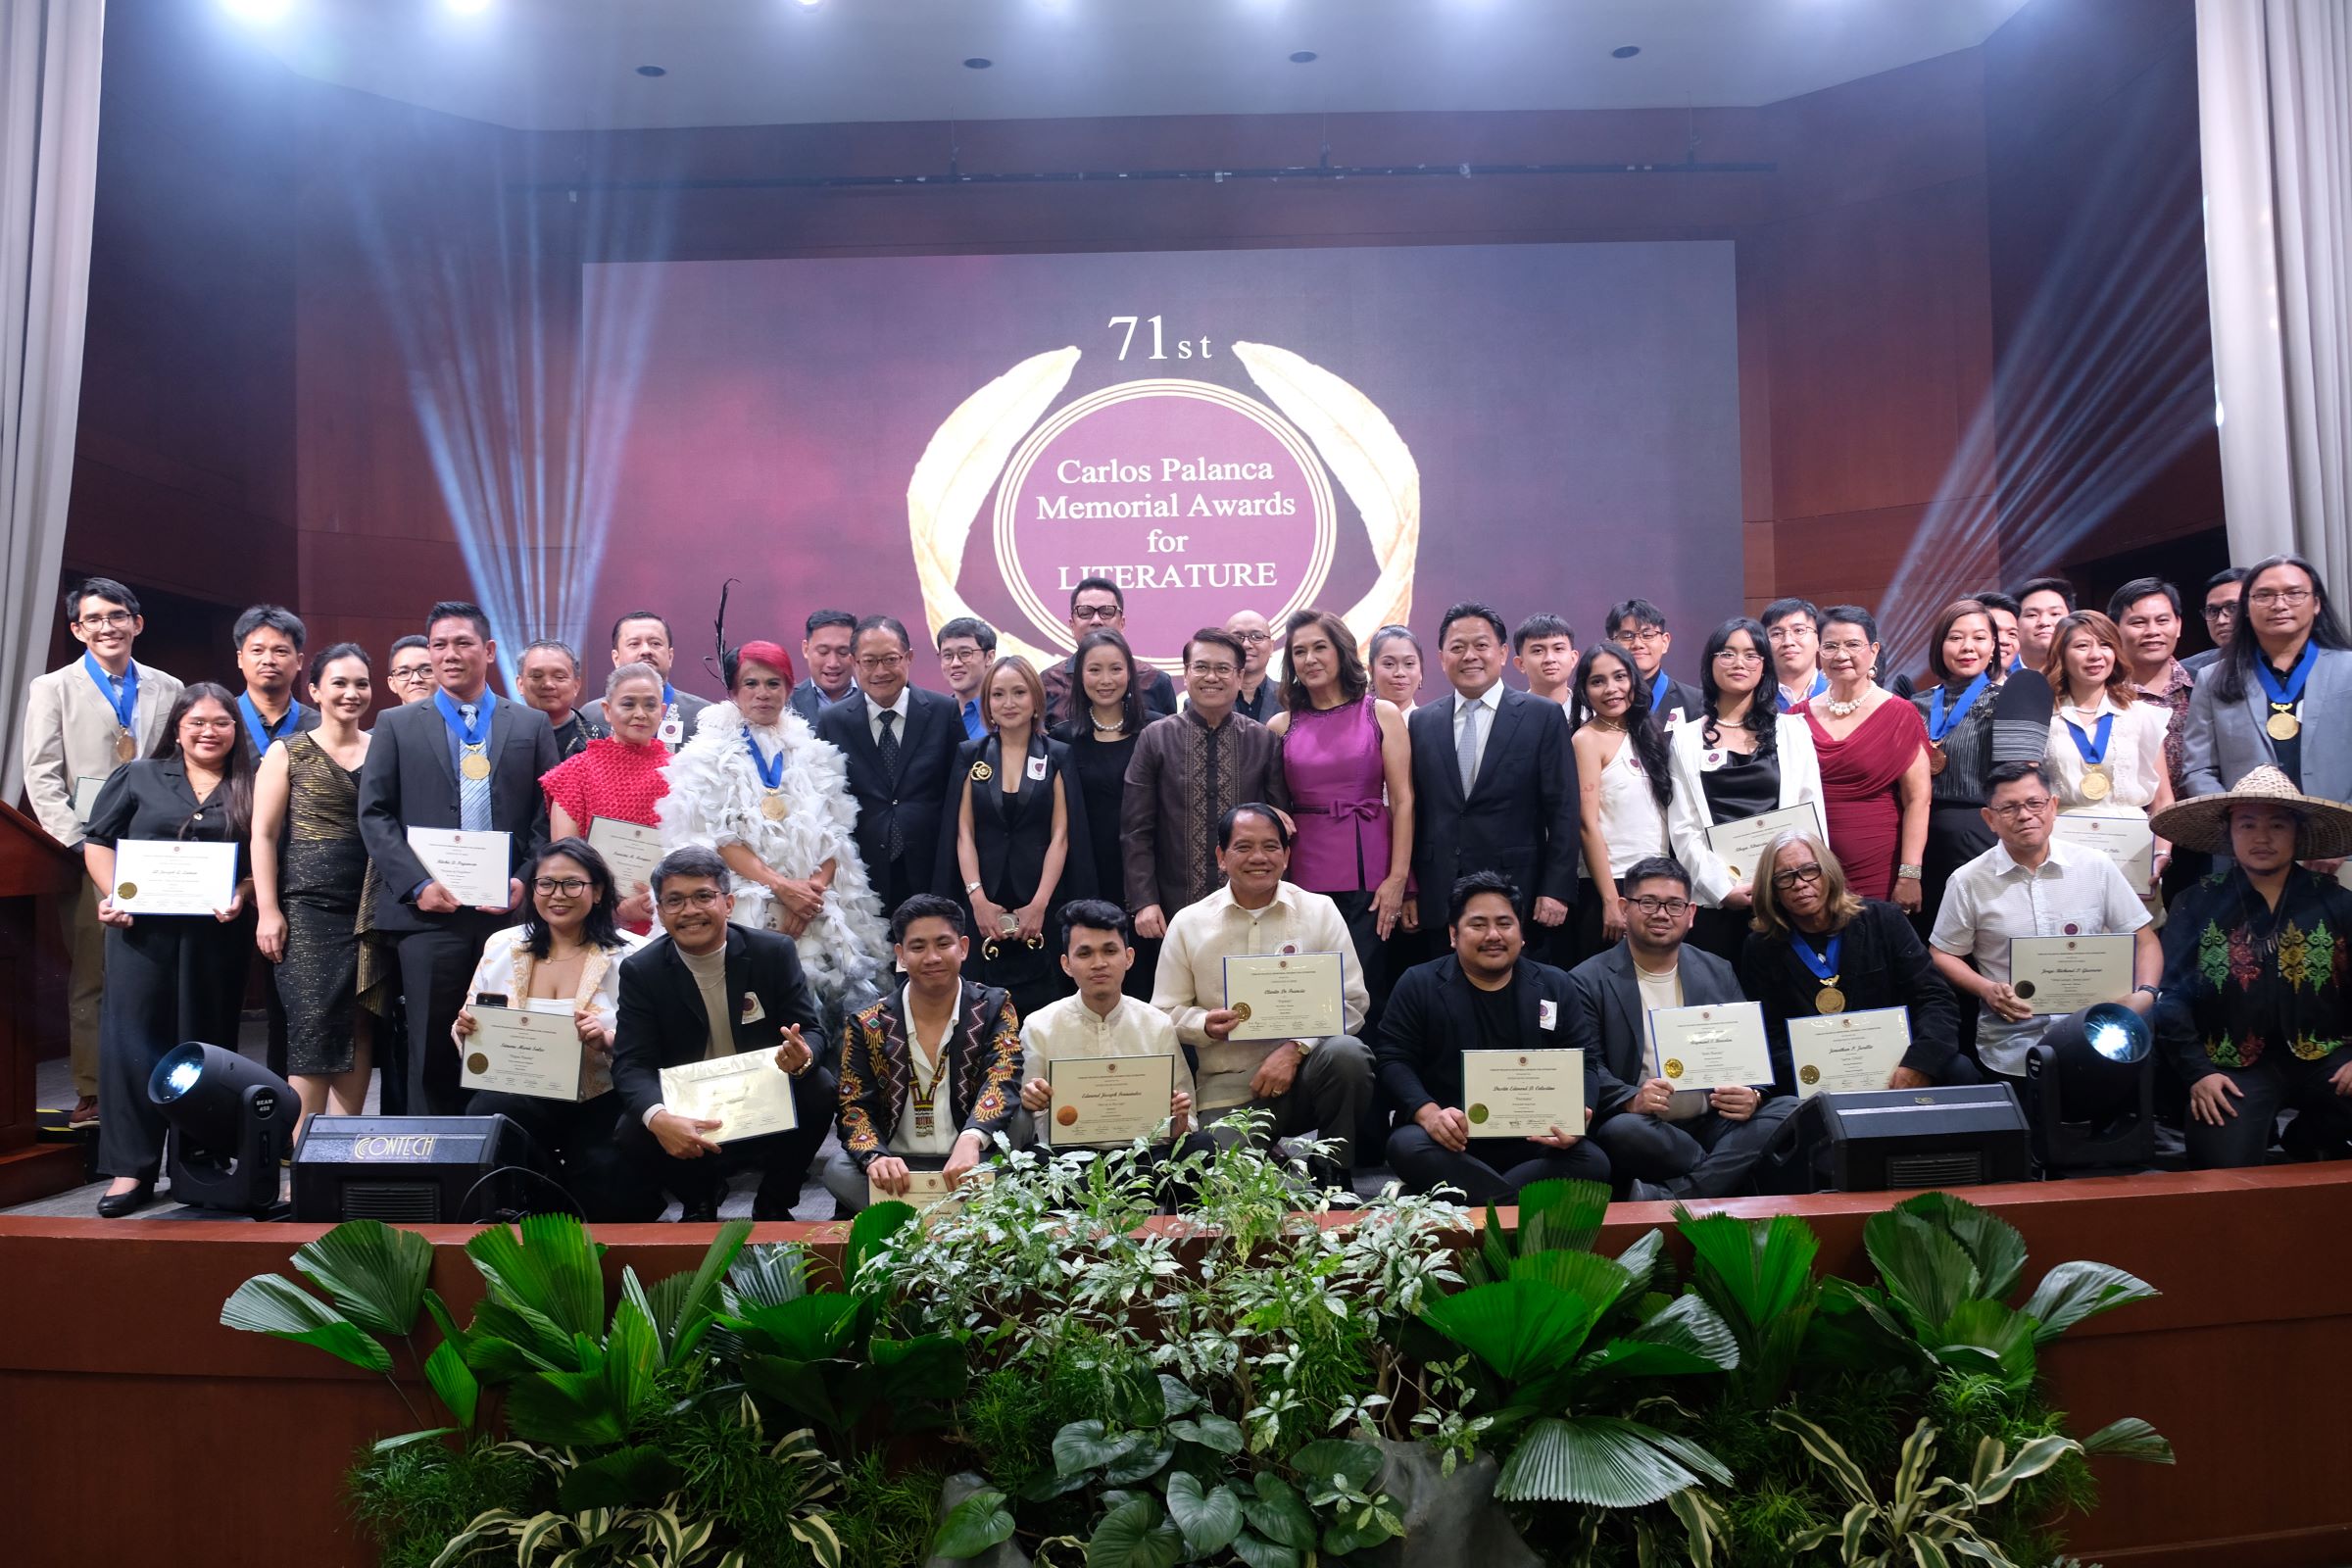 71st Palanca Awards holds ceremony at historical PICC